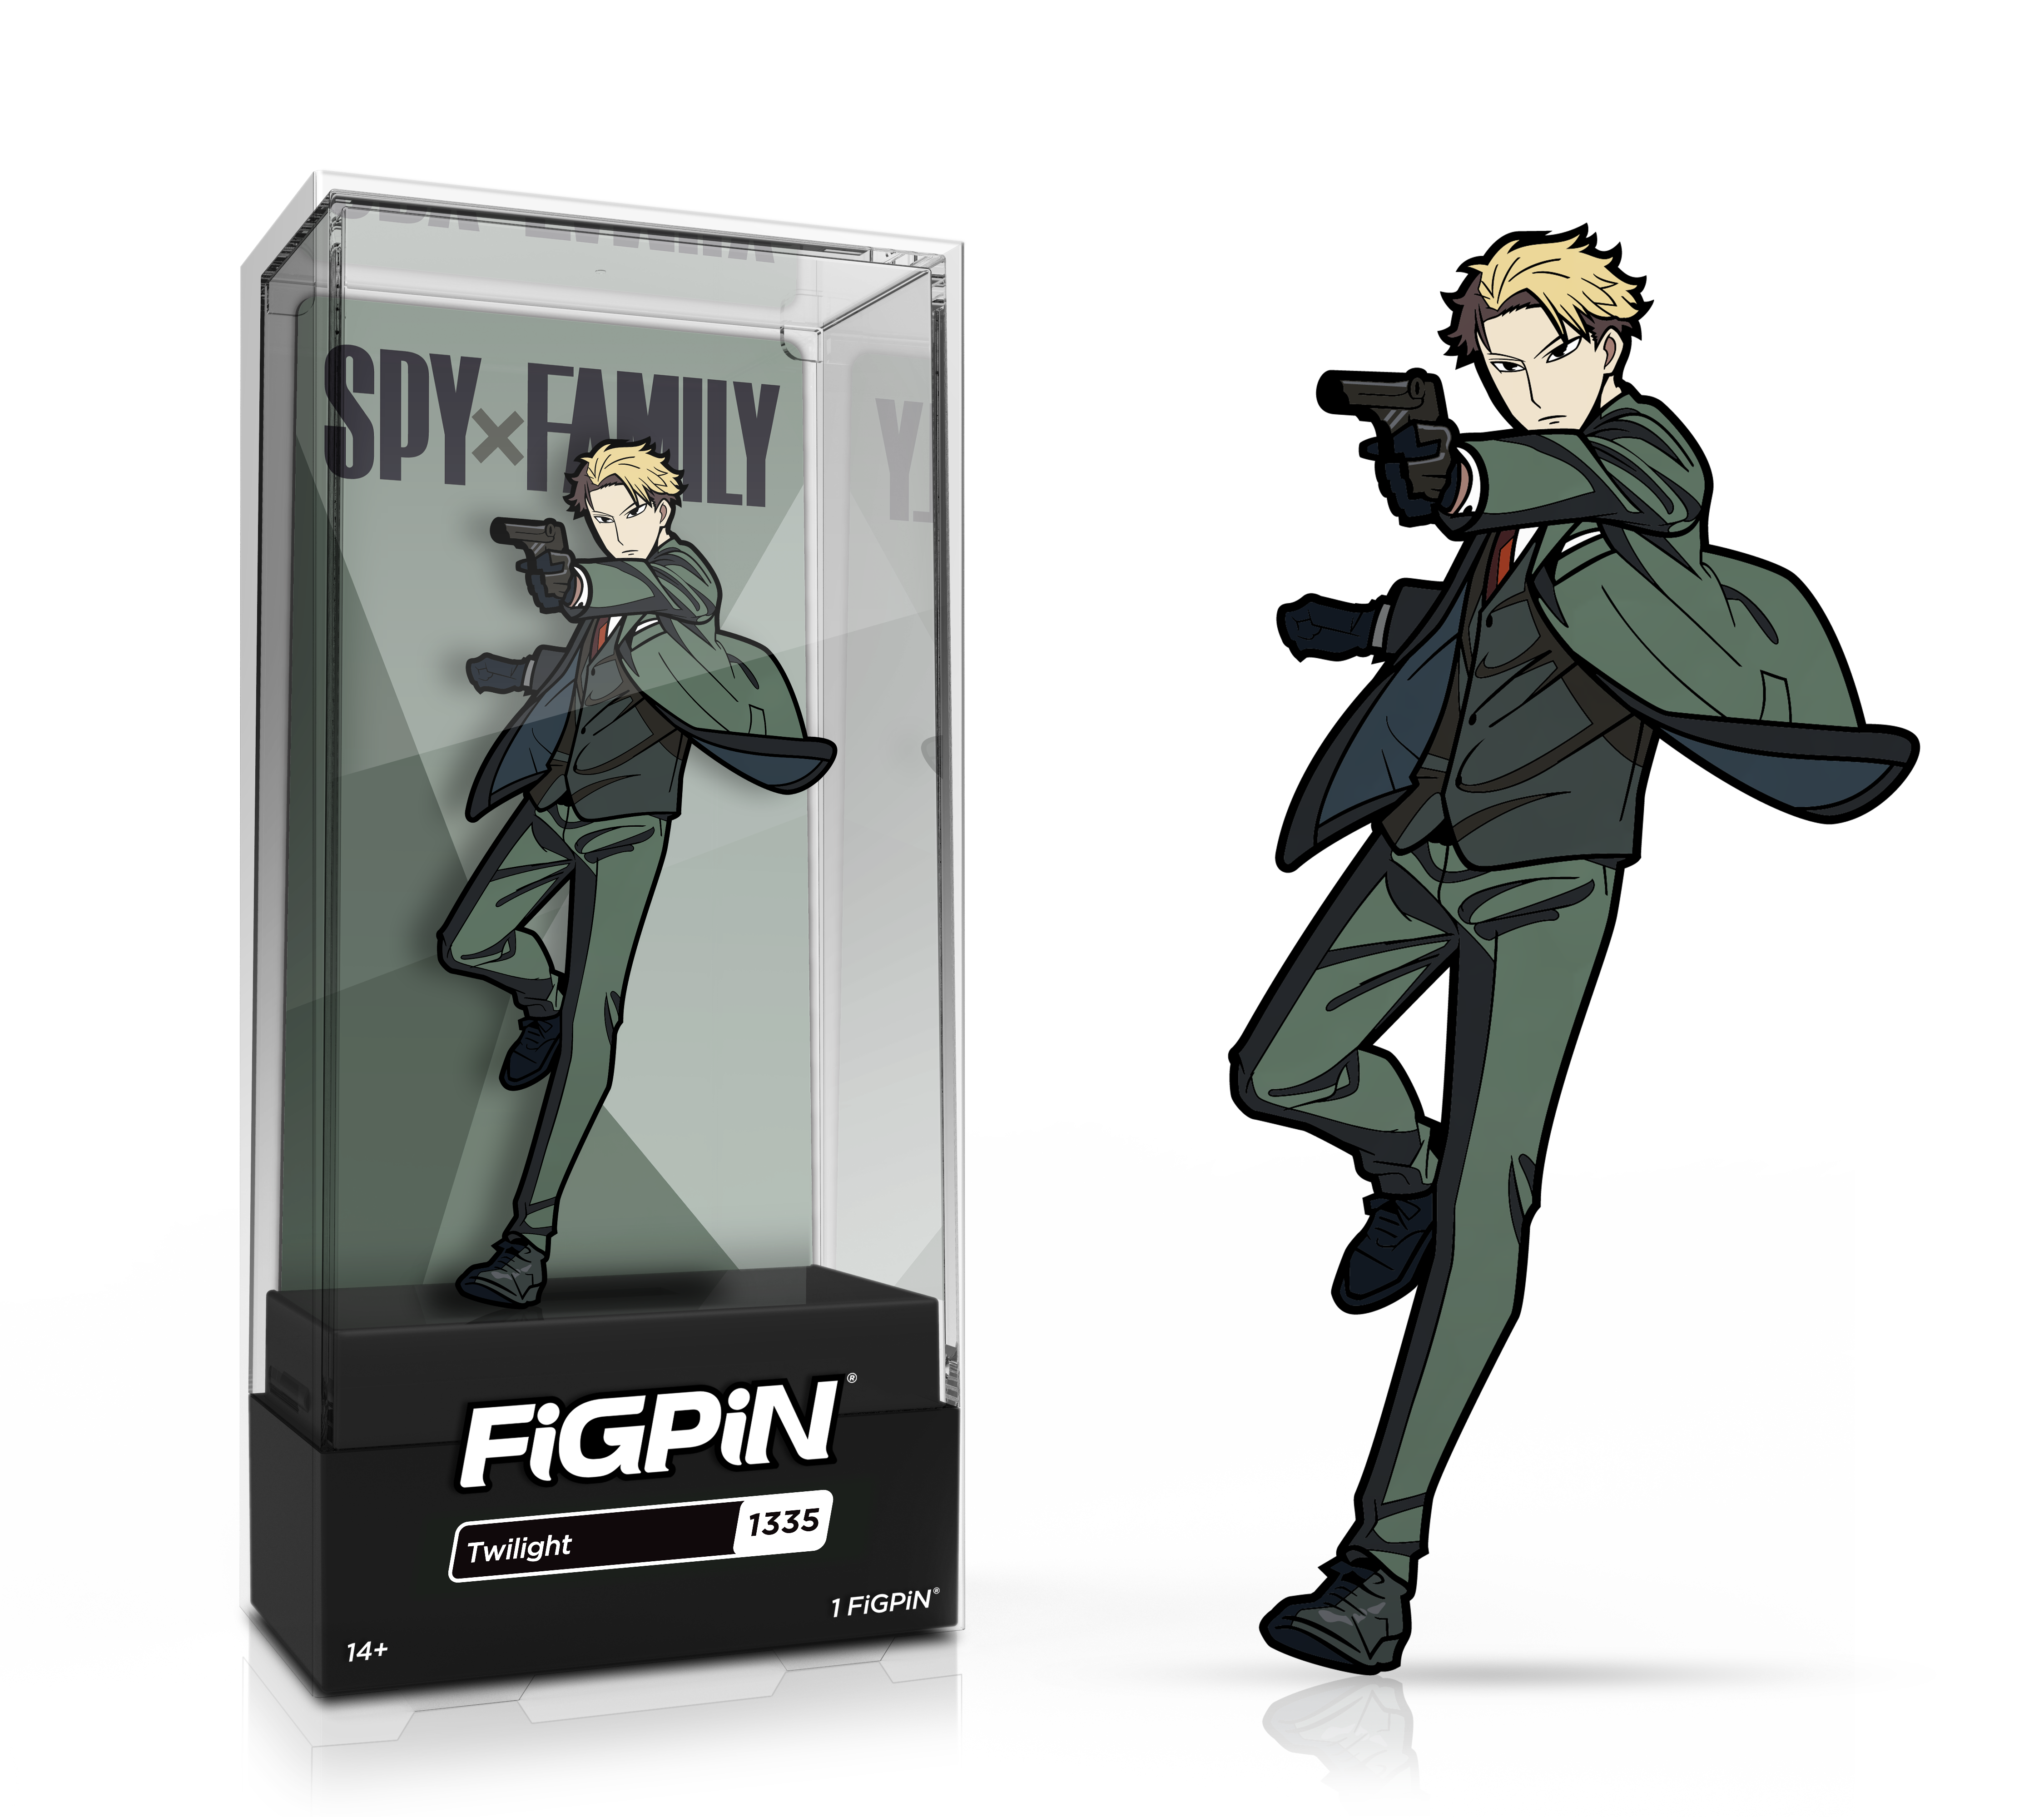 Side by side view of the Twilight enamel pin in display case and the art render.